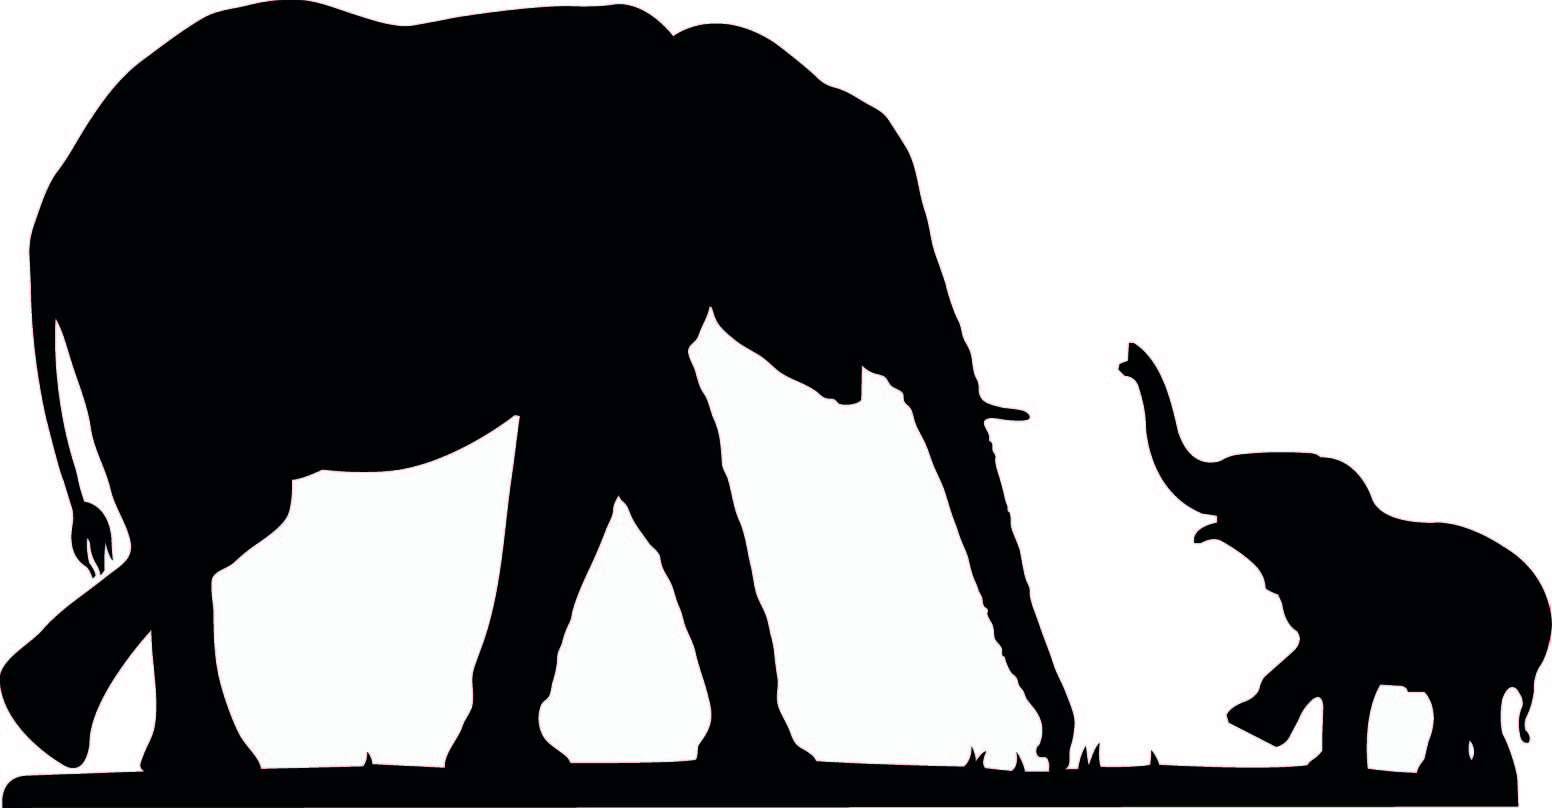 Mother and child silhouette clipart baby elephants 